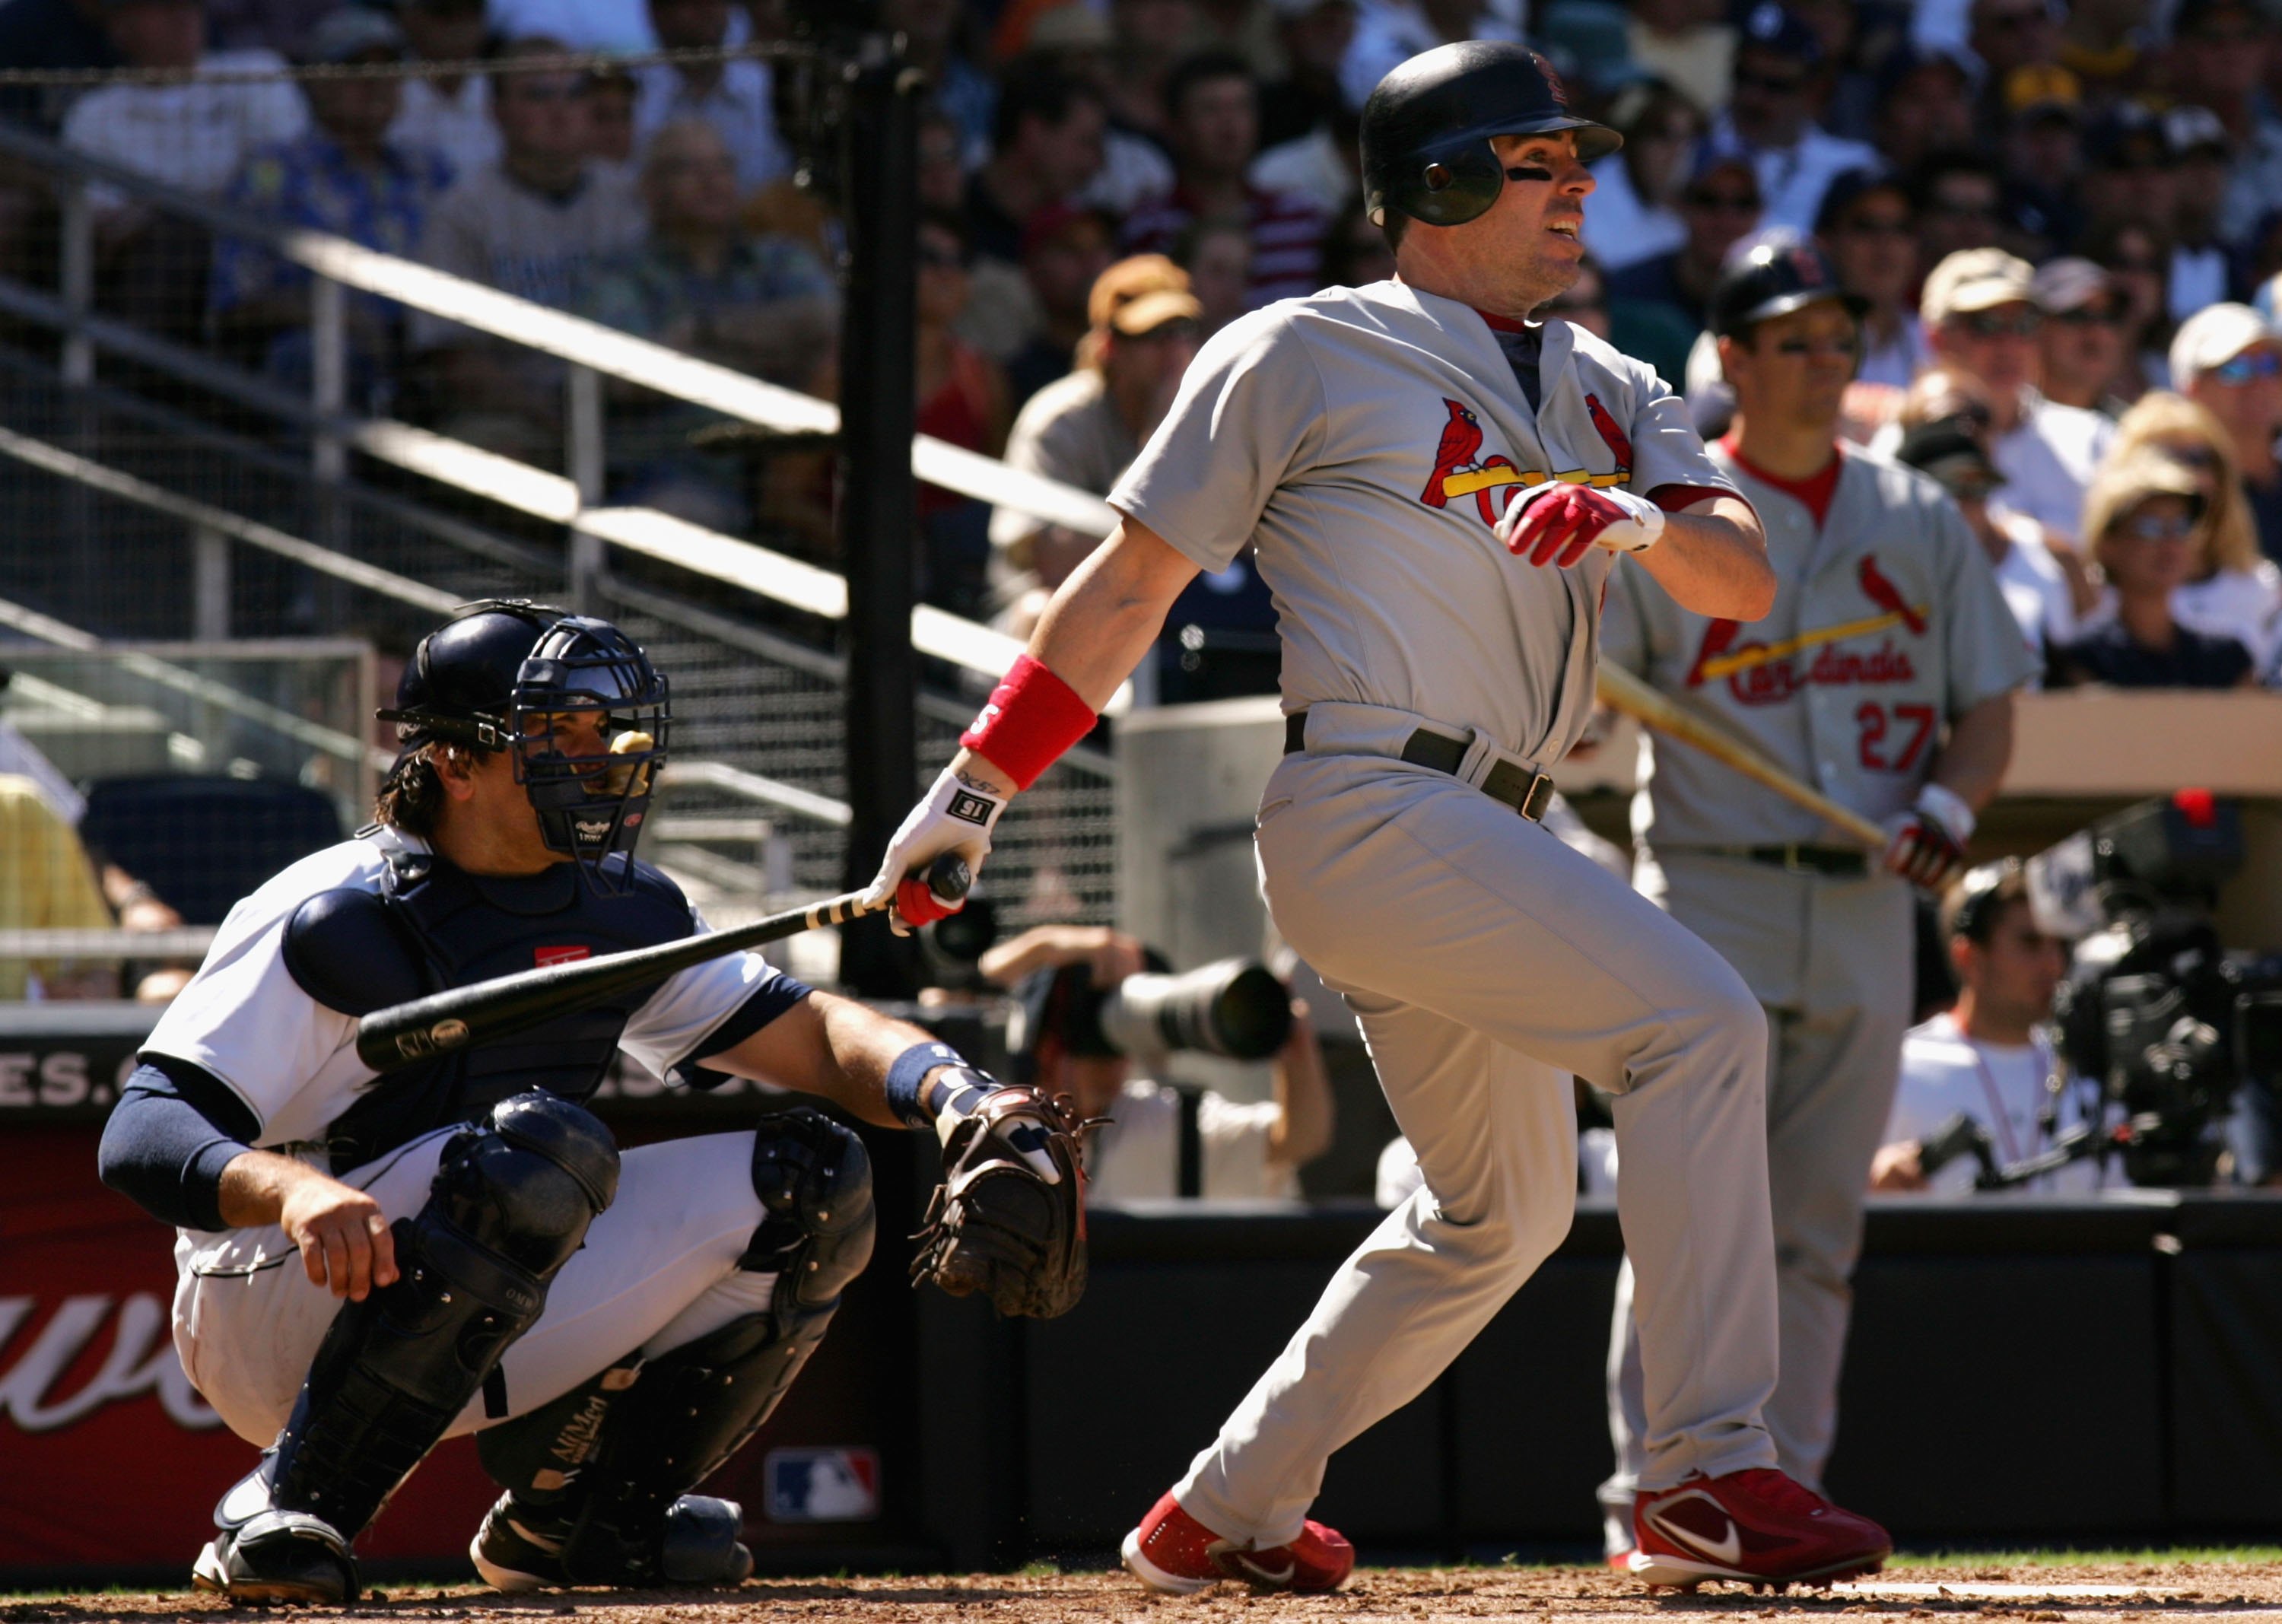 Jim Edmonds belts two home runs in the 4th inning 